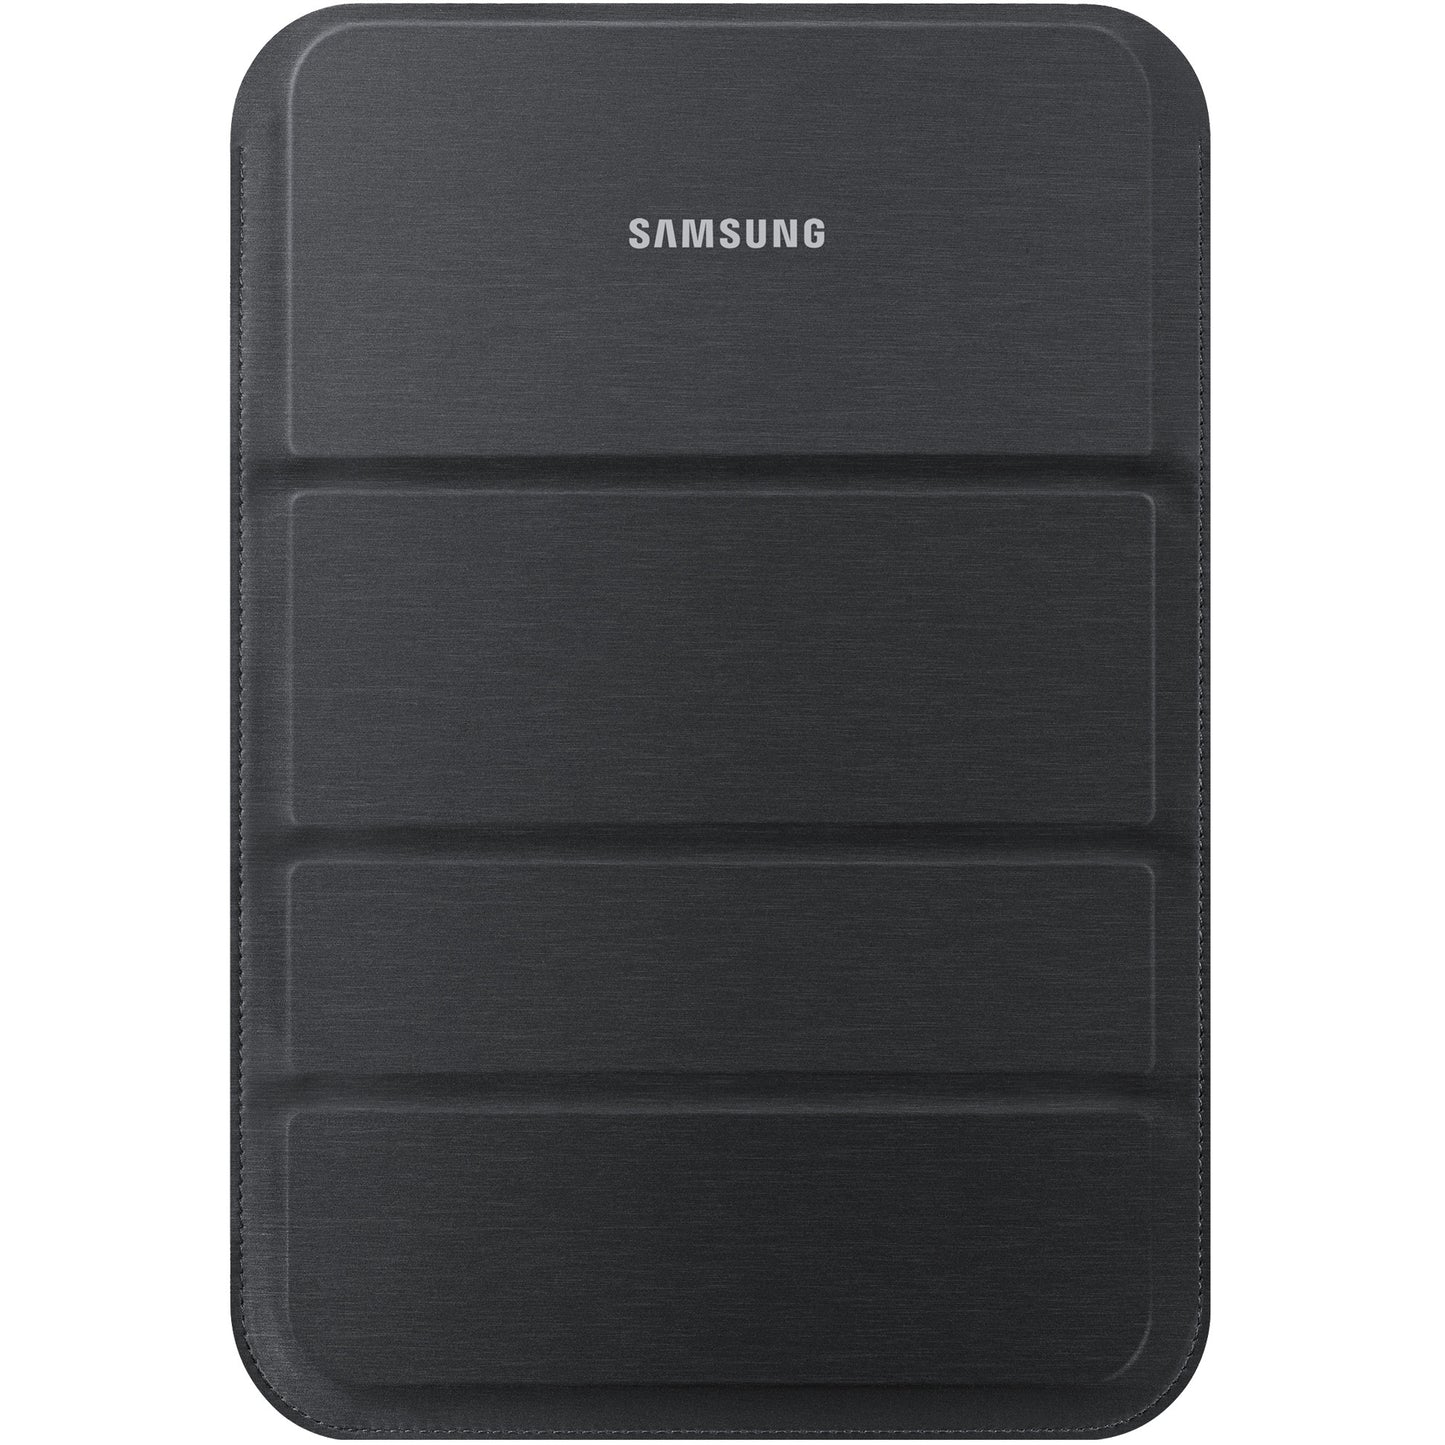 Samsung EF-SN510B Carrying Case (Pouch) for 8" Tablet - Black